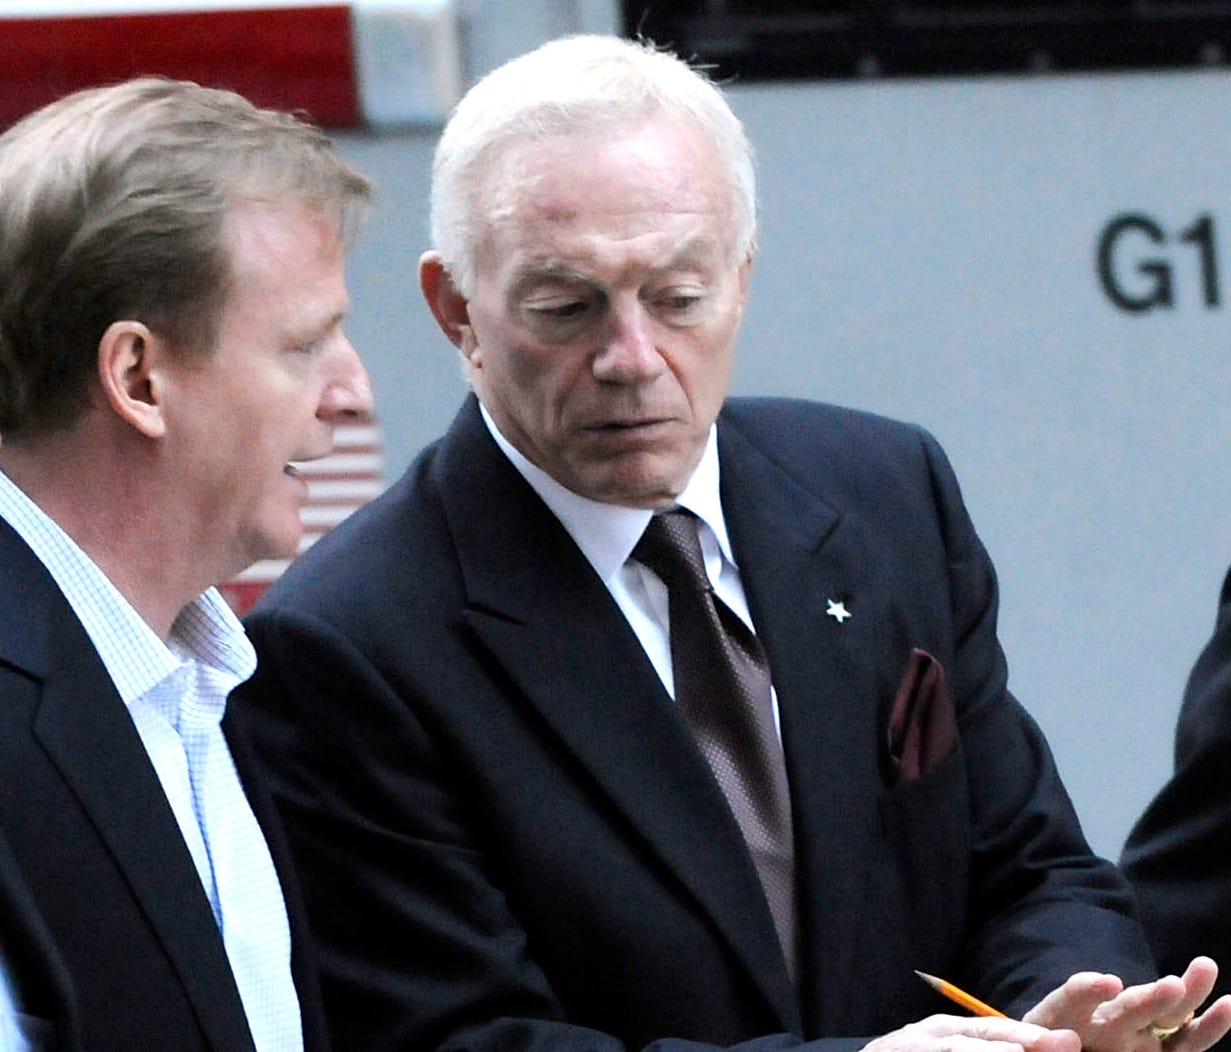 Dallas Cowboys owner Jerry Jones, right, has threatened to sue the league over NFL Commissioner Roger Goodell's contract. Now the league is fighting back.